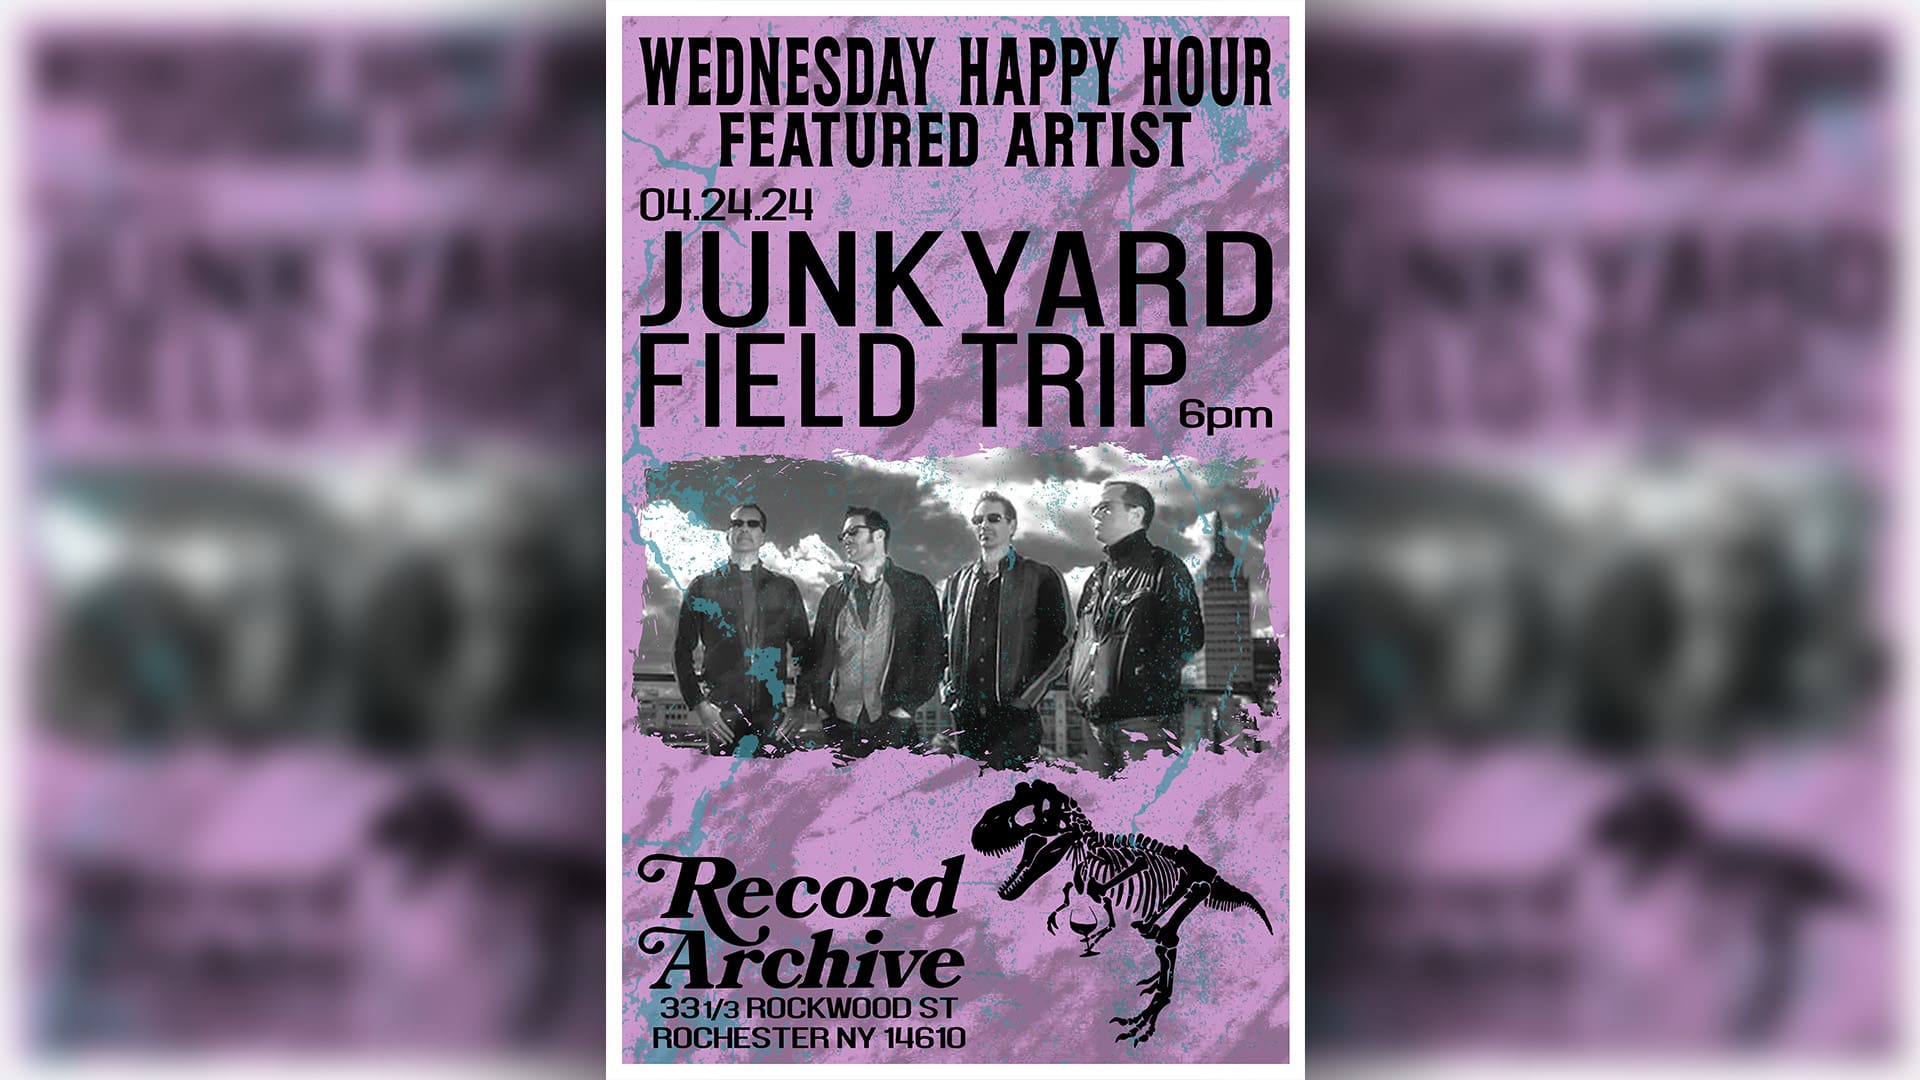 Wednesday Happy Hour Featured Artist. 4.24.24. Junk Yard Field Trip 6-8pm. Record Archive. 33 1/3 Rockwood St Rochester NY 14610